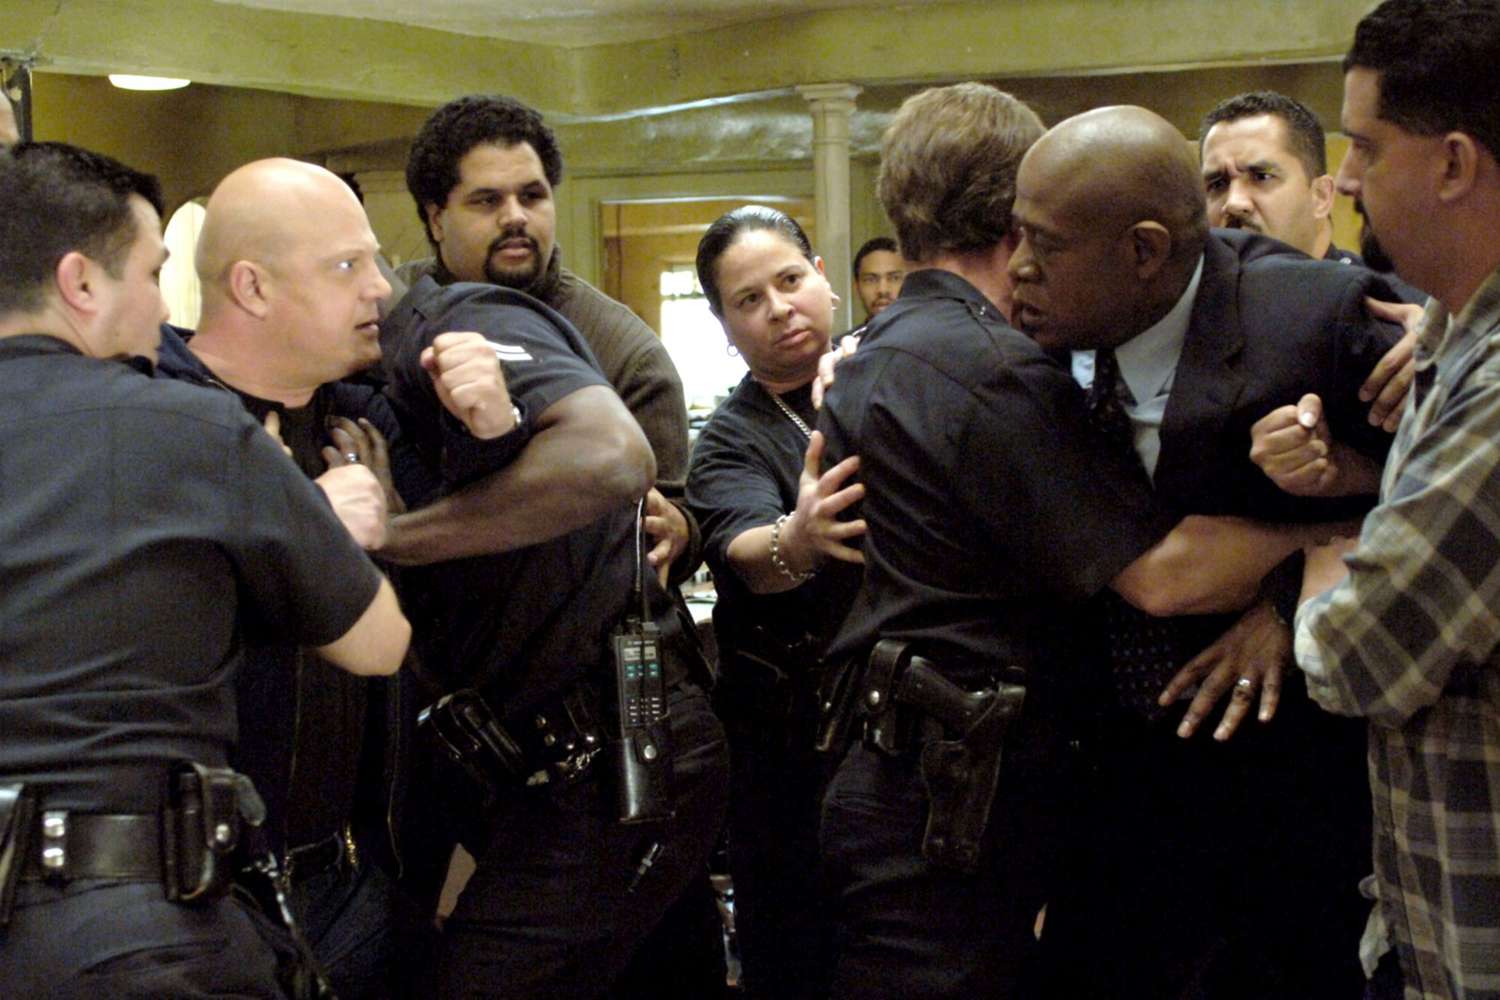 THE SHIELD, Michael Chiklis, Forest Whitaker, 'On The Jones', (Season 6, aired Apr. 3, 2007), 2002-0